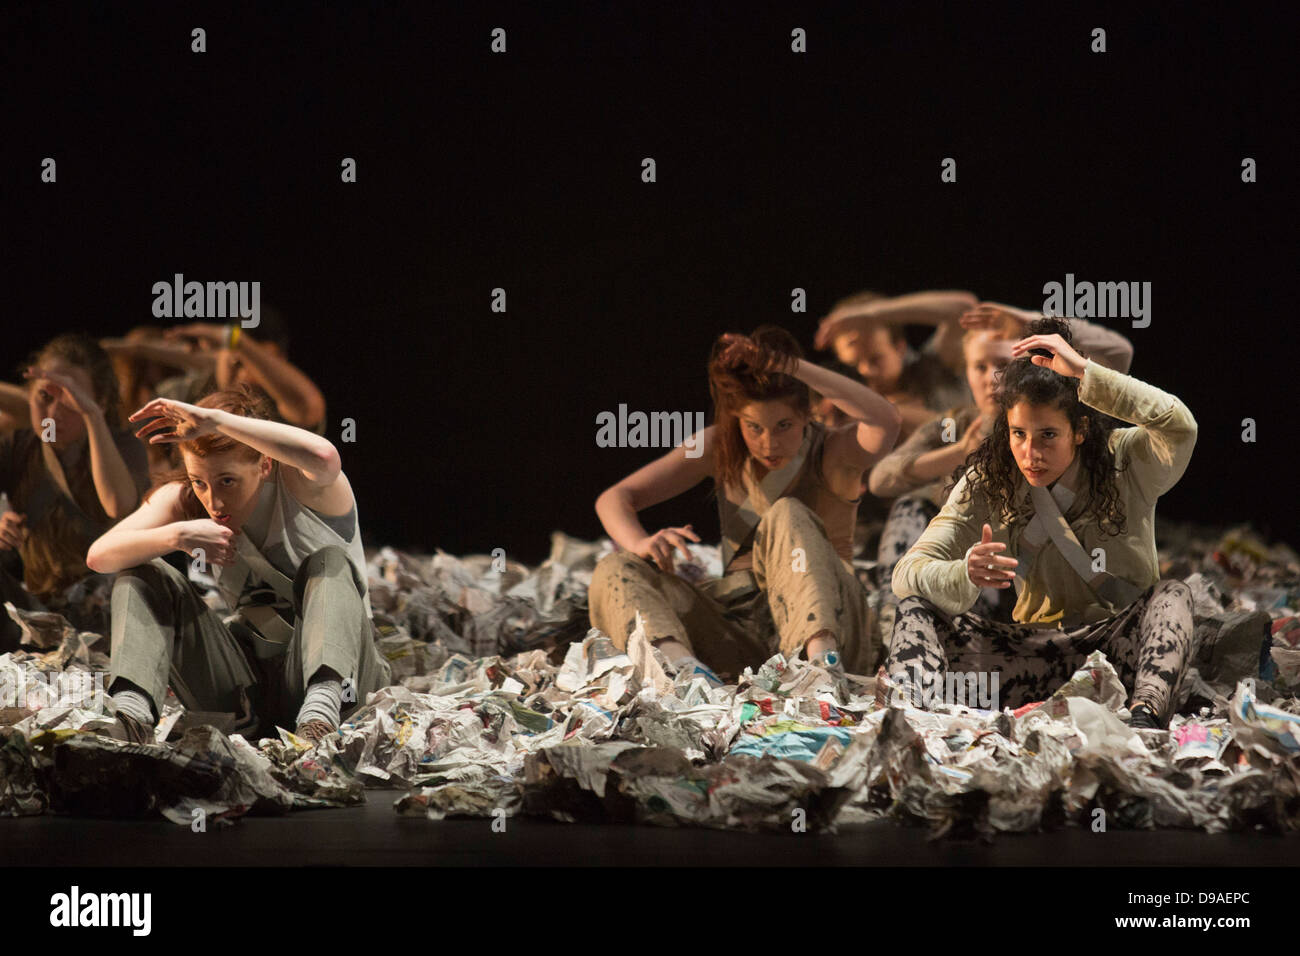 Dance project "Riot Offspring" at Sadler's Wells Theatre, London. Stock Photo